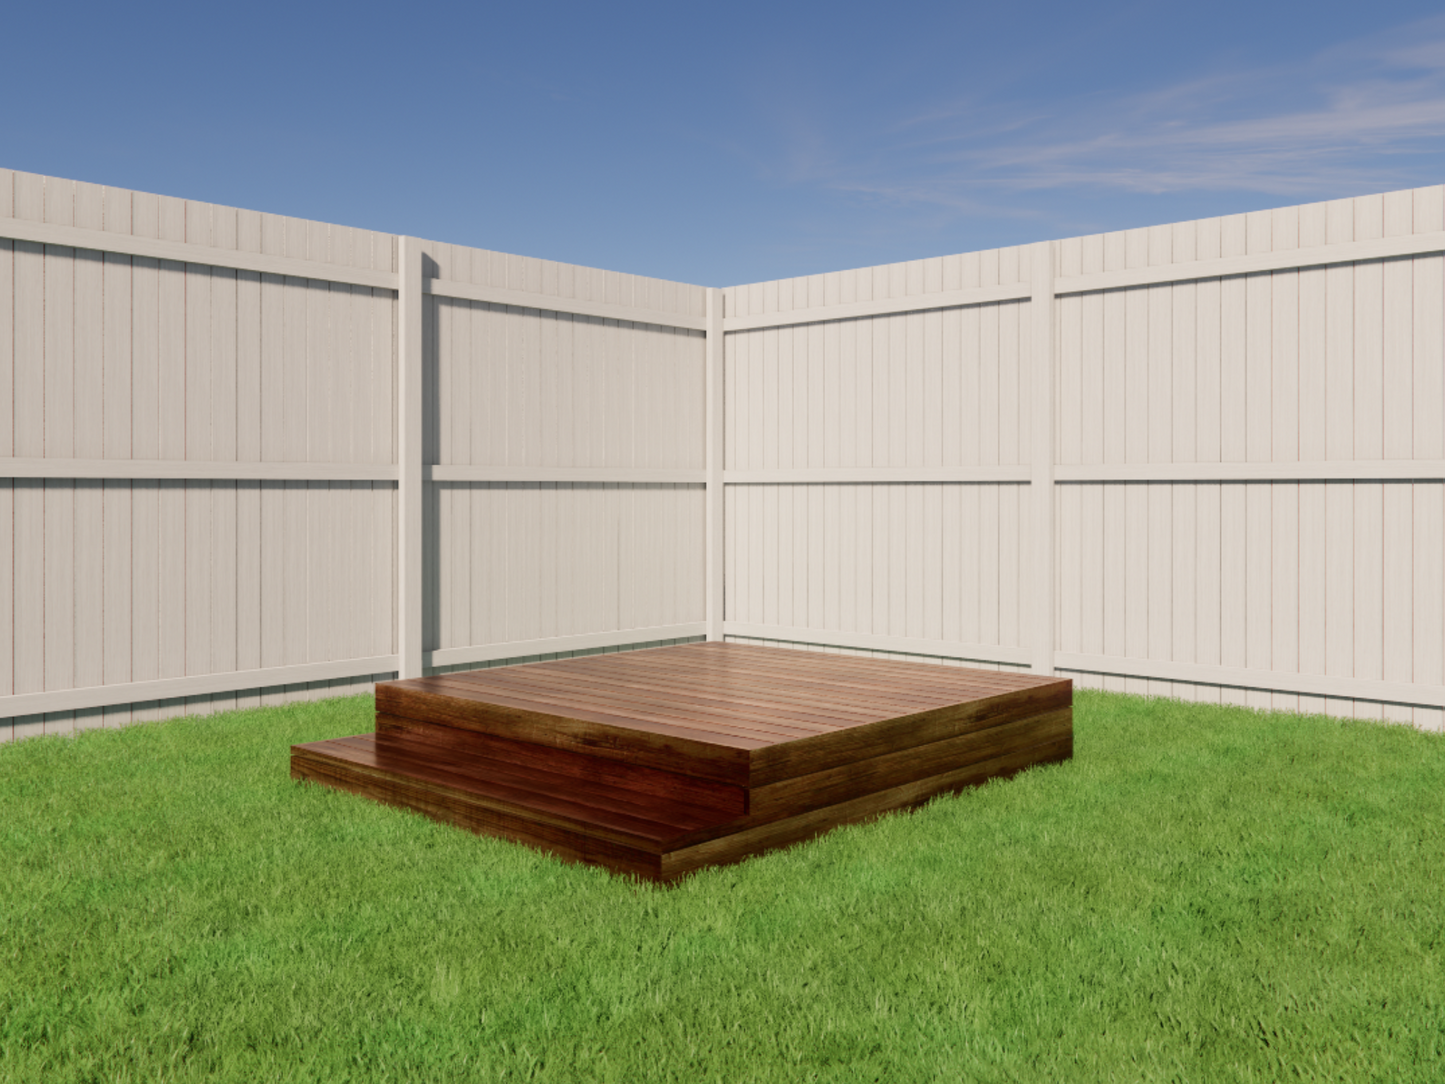 How to Build a Deck - Step-By-Step DIY Guide to Show You Exactly How With Materials List - Easily Adjust/Apply The Structure To Your Space!